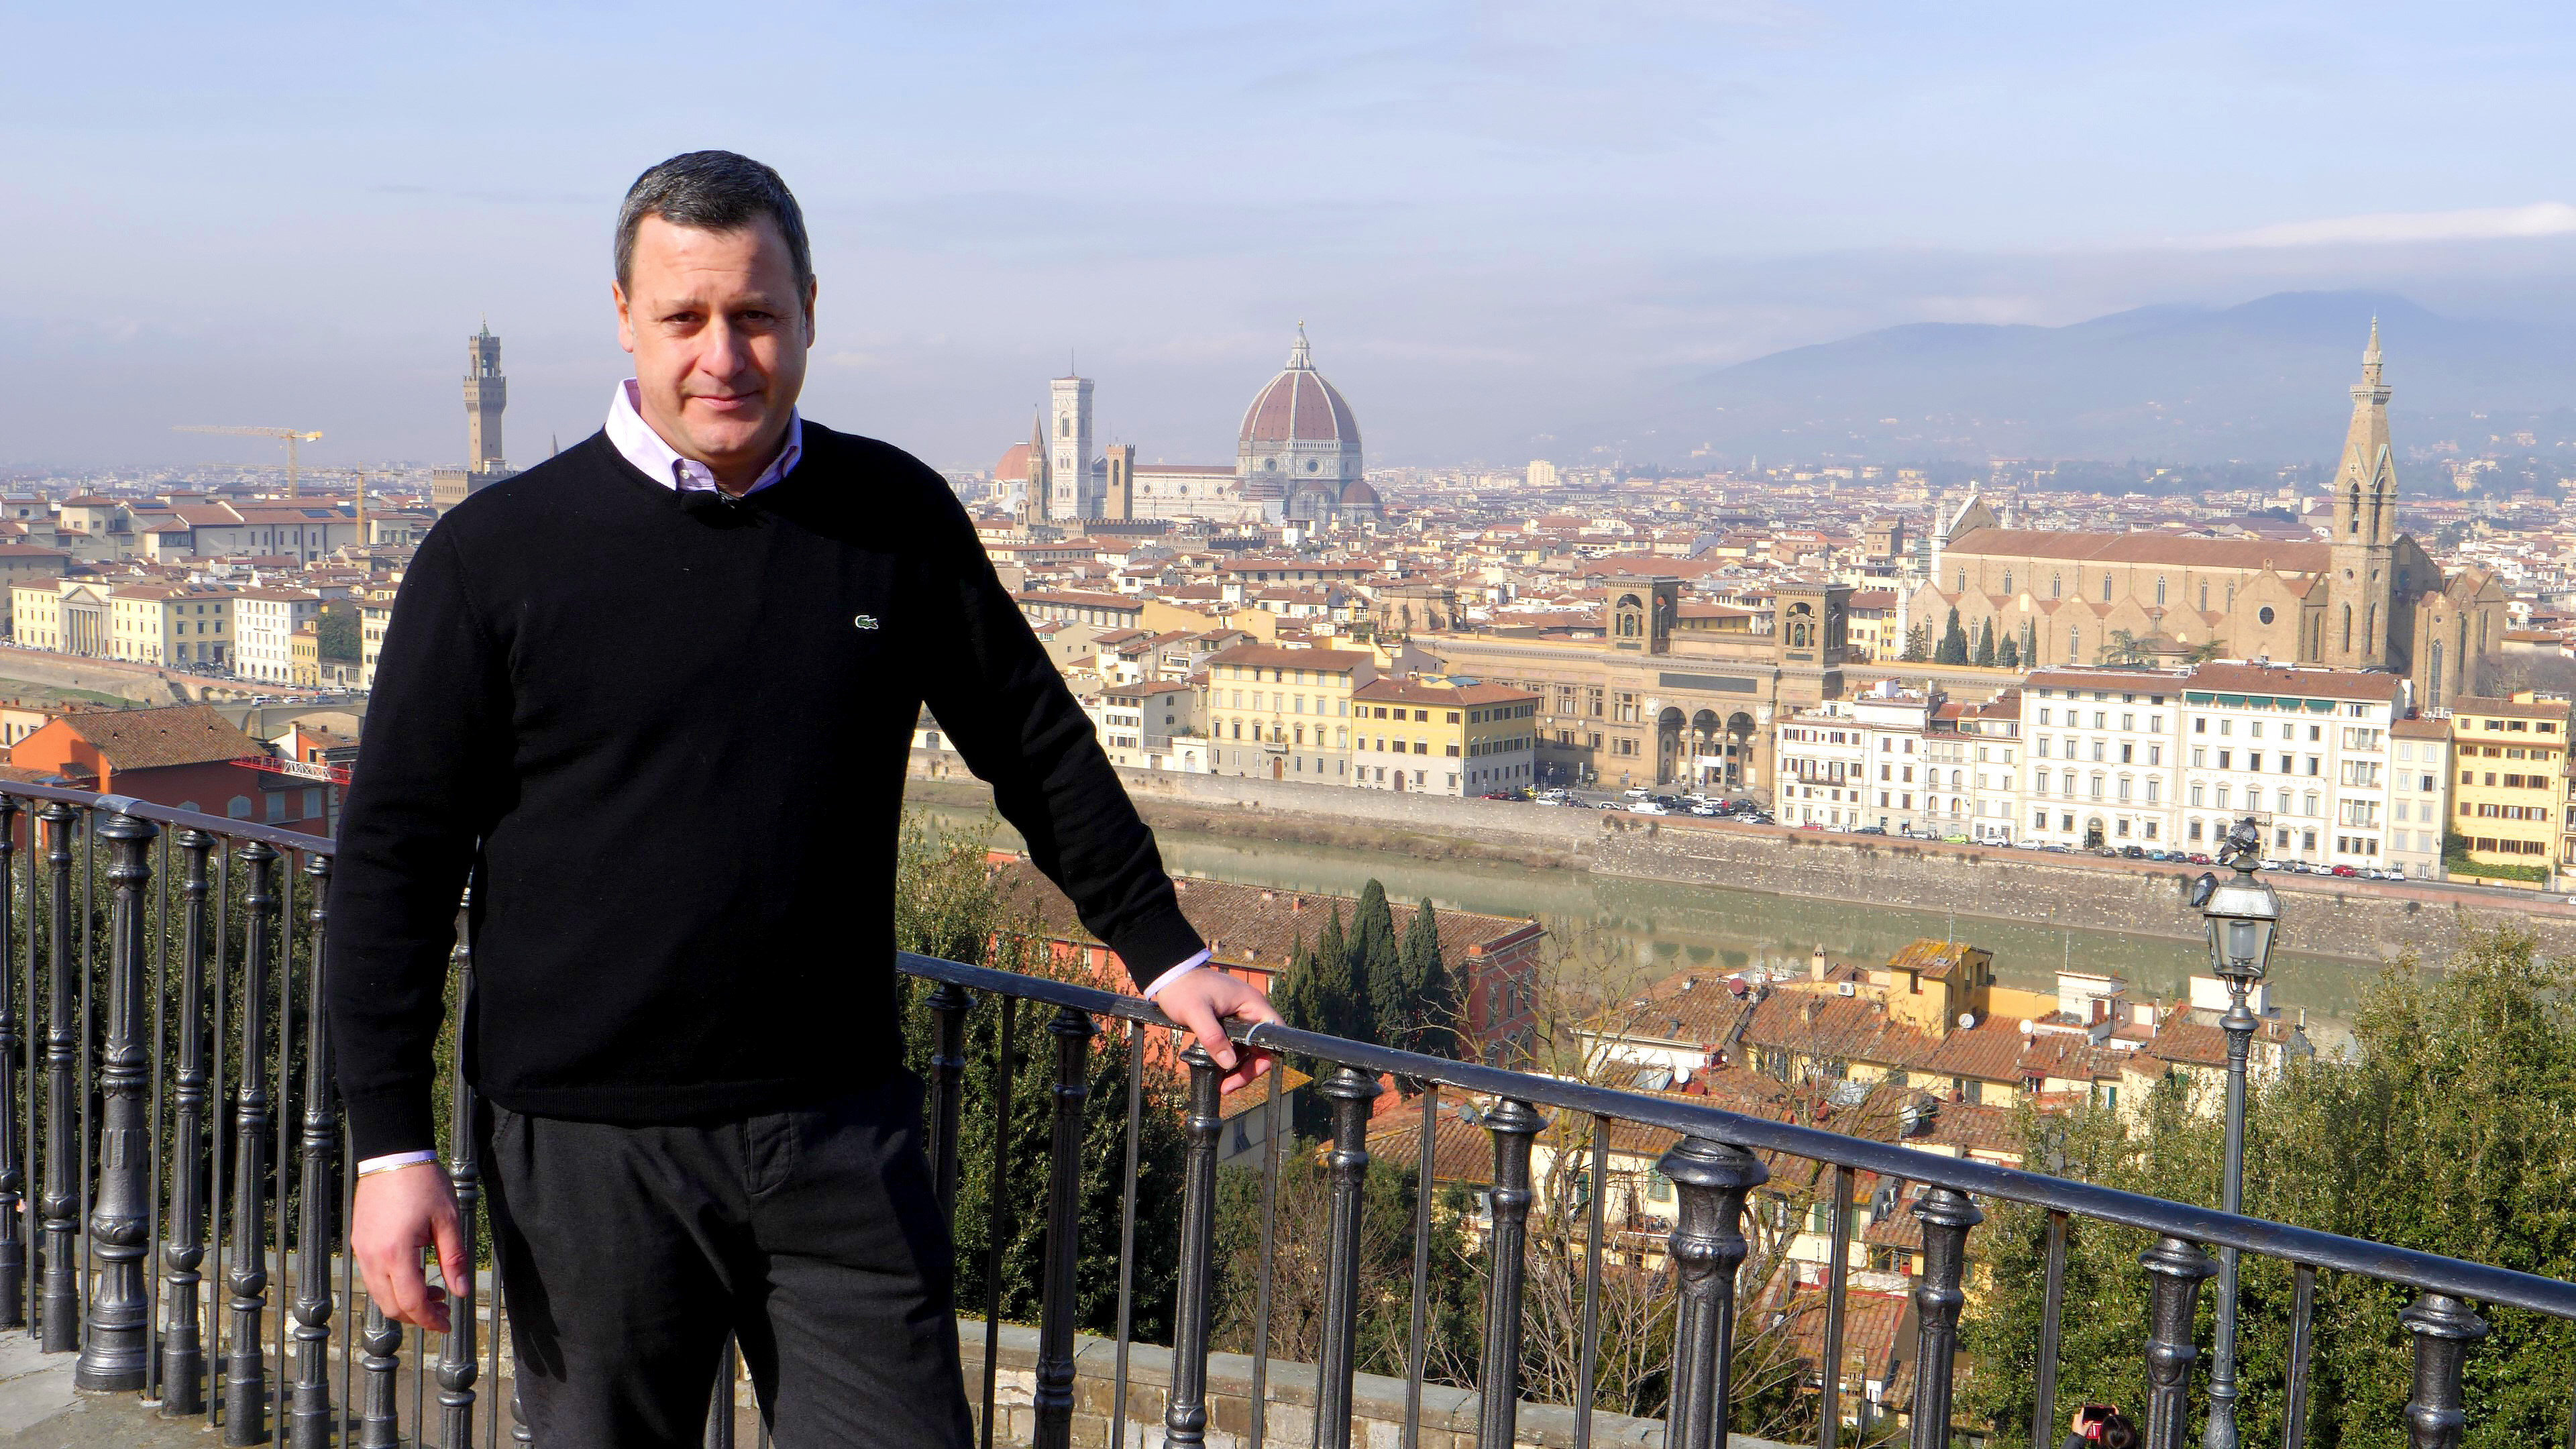 Dr. Rocky Ruggiero stands at the Piazzale Michelangelo to give an overview of the historic buildings that make up the iconic skyline of Florence, Italy.